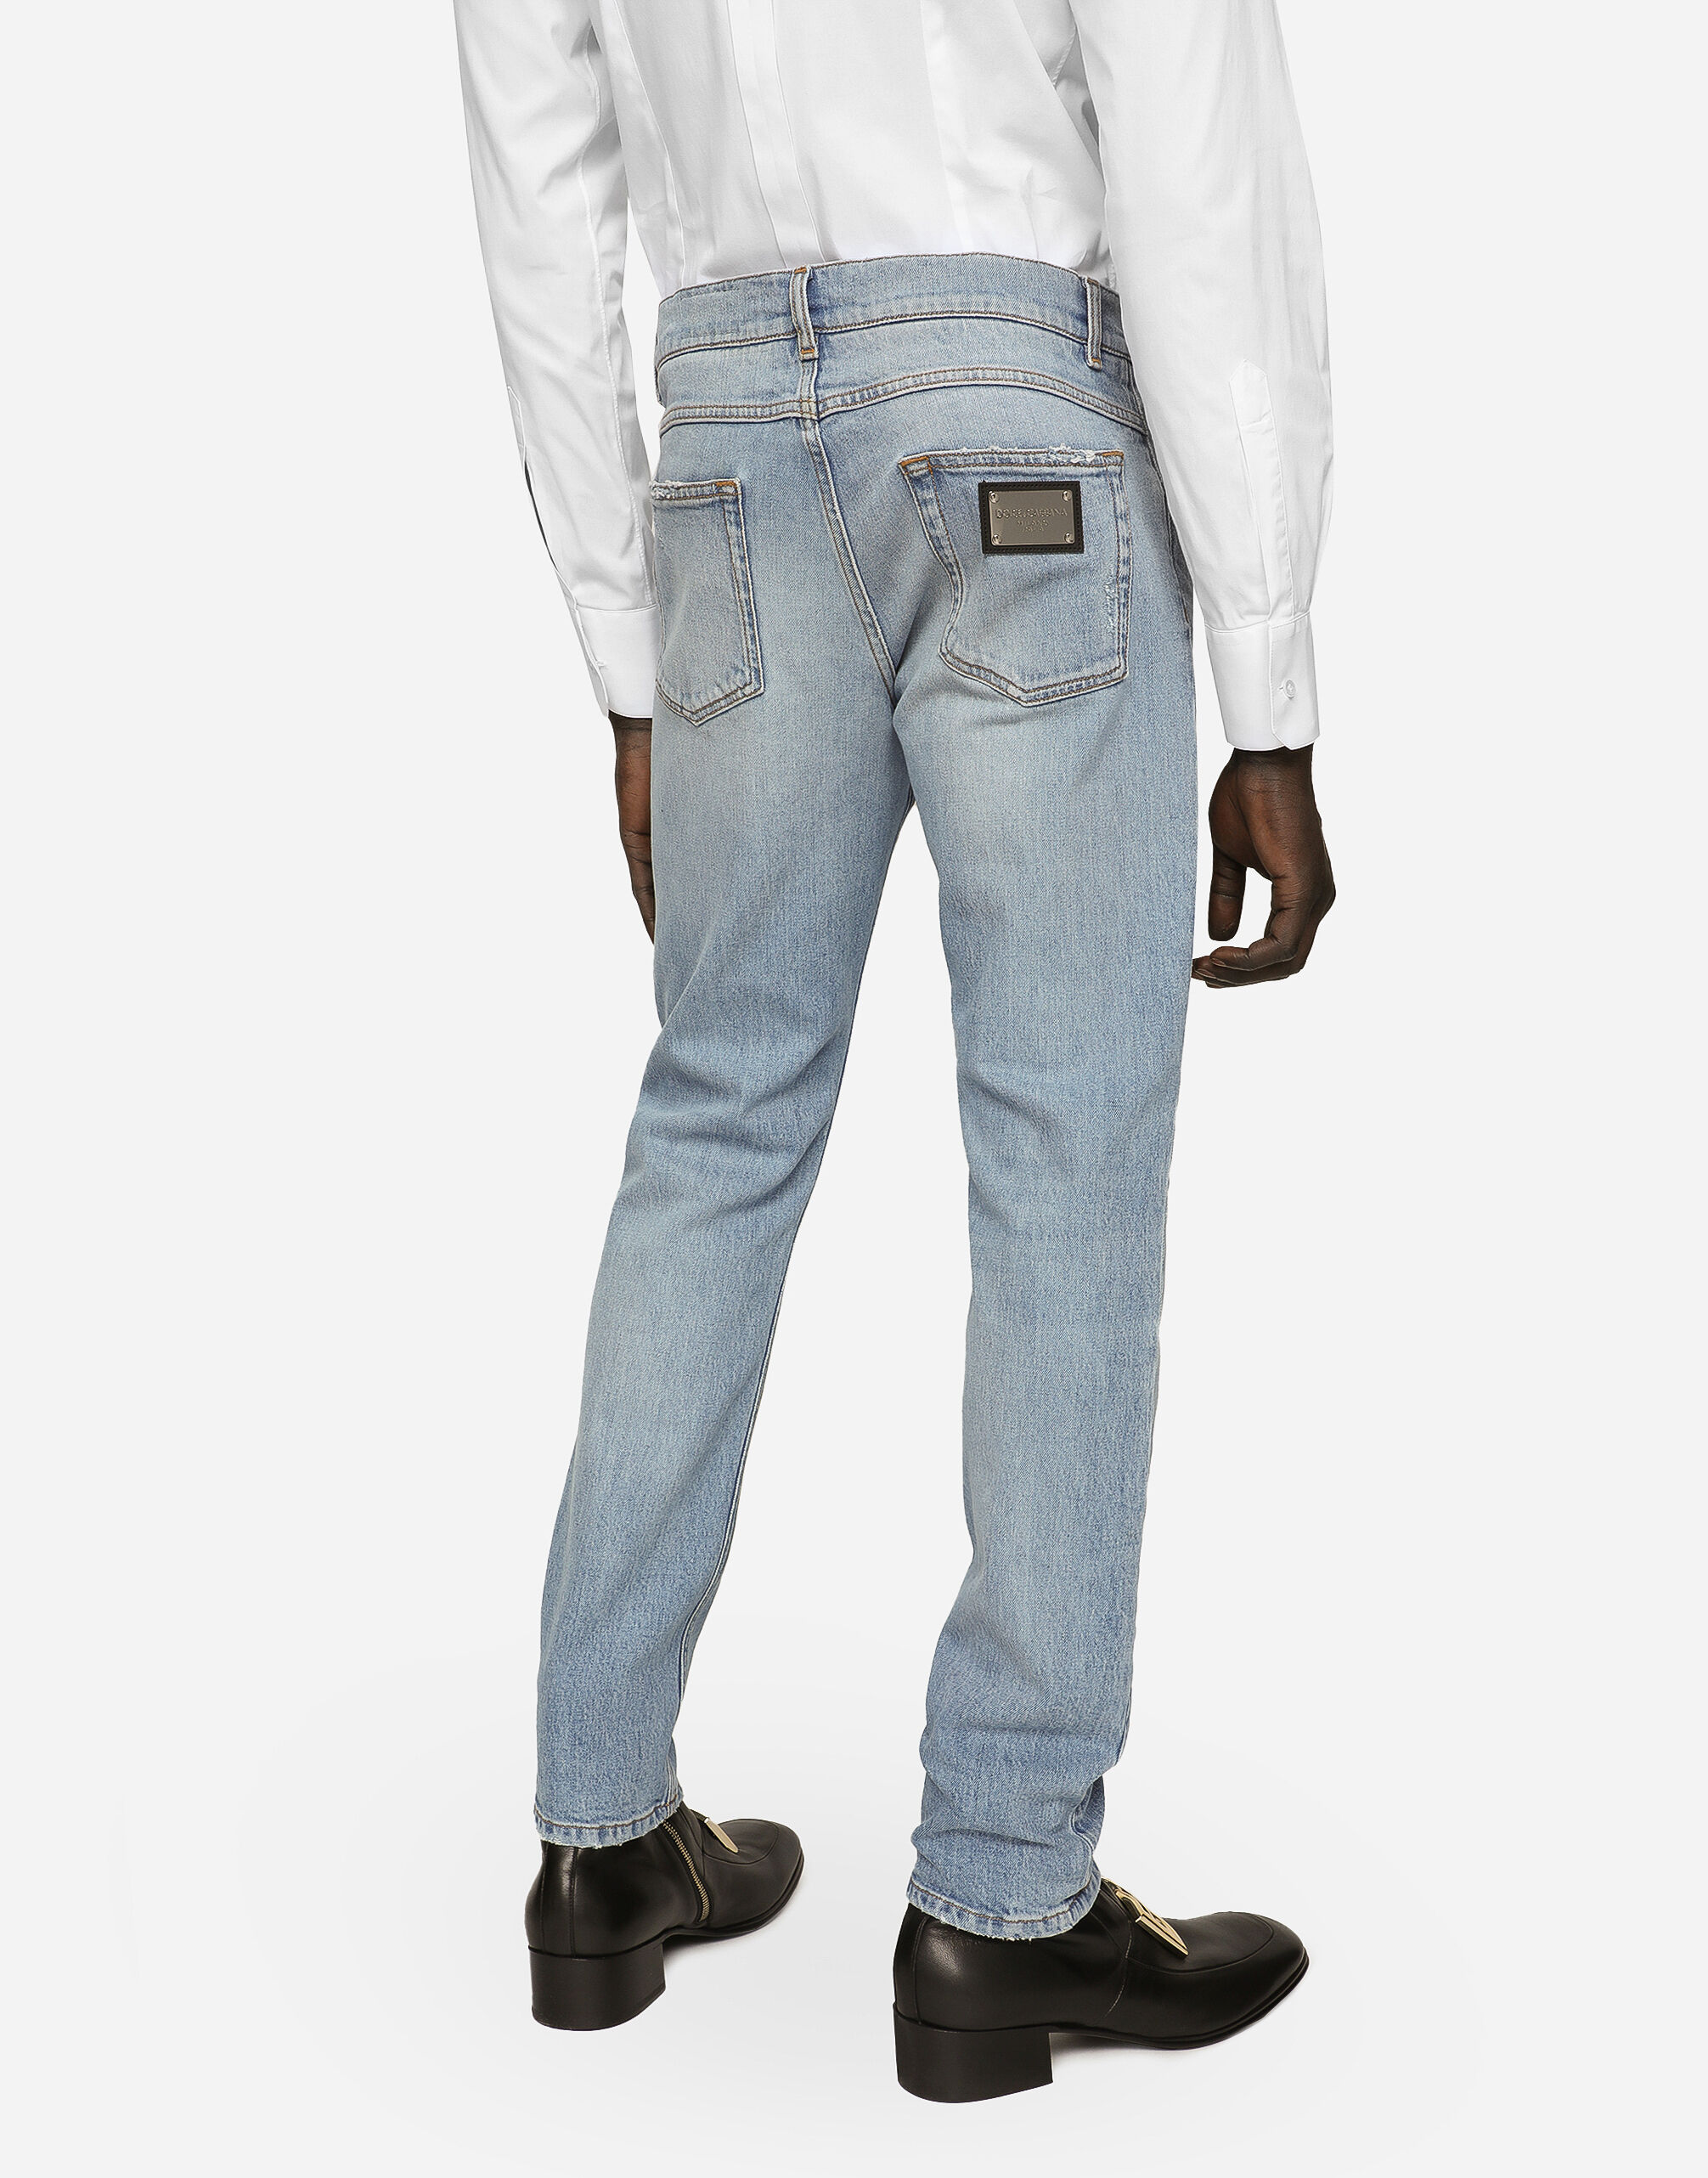 Regular fit washed stretch denim jeans with abrasions